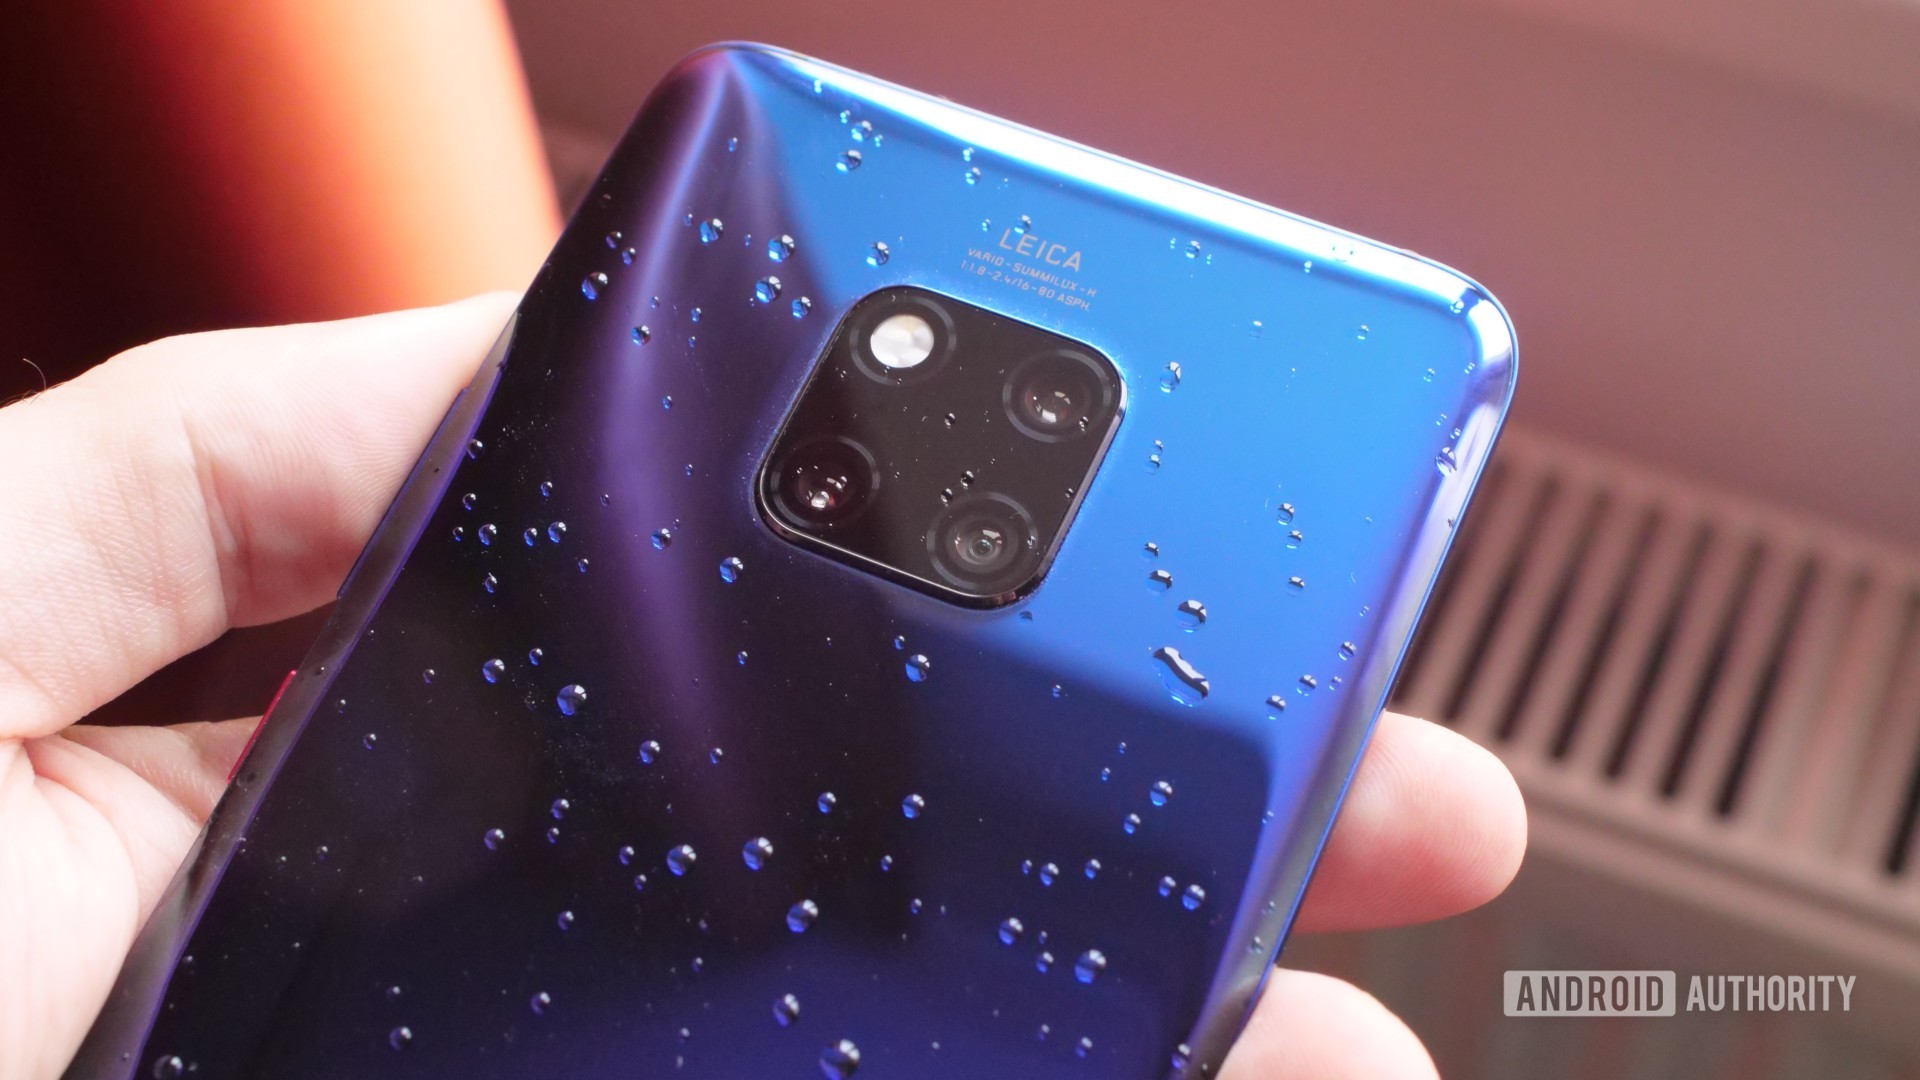 The HUAWEI mate 20 Pro in Twilight in hand with water on the back